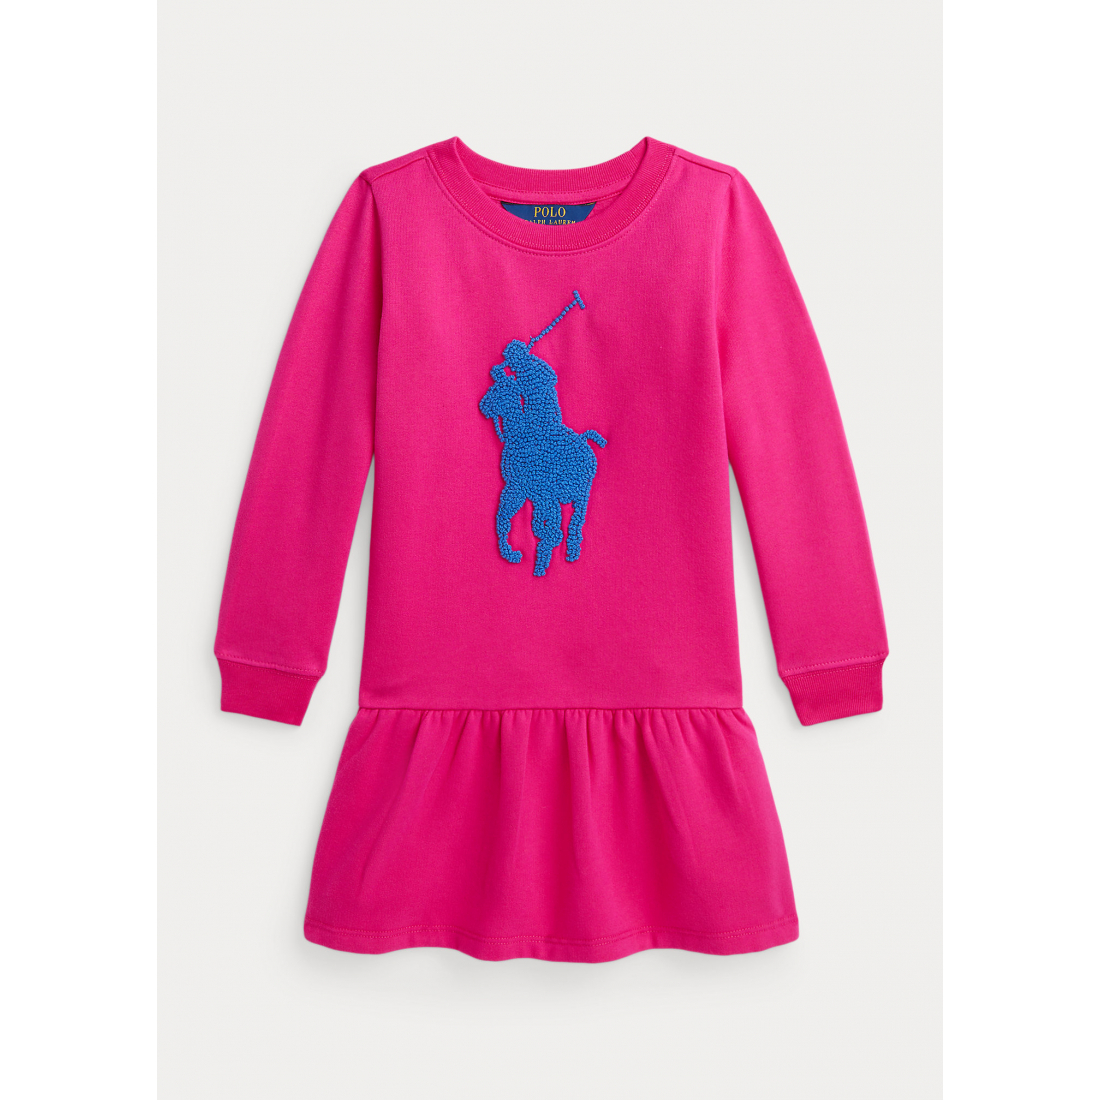 Little Girl's 'French Knot Big Pony' Long-Sleeved Dress